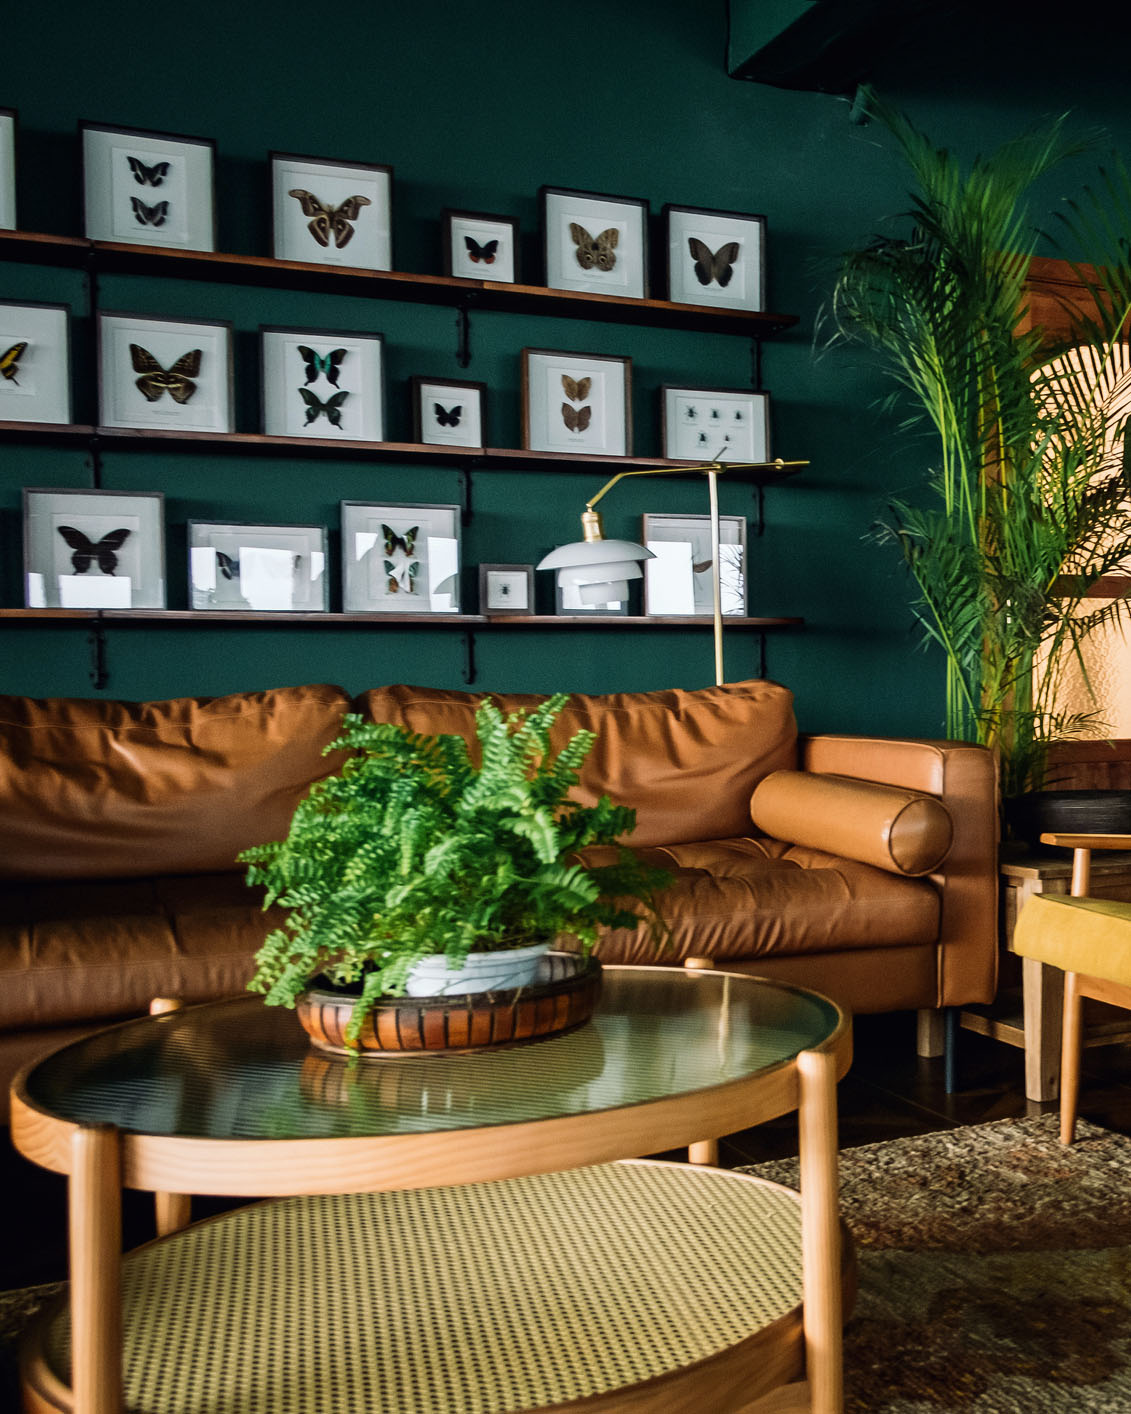 A stylish living room interior with brown and yellow coloured furniture and wooden elements with dark green coloured wall. Decorated with plants and butterfly specimen